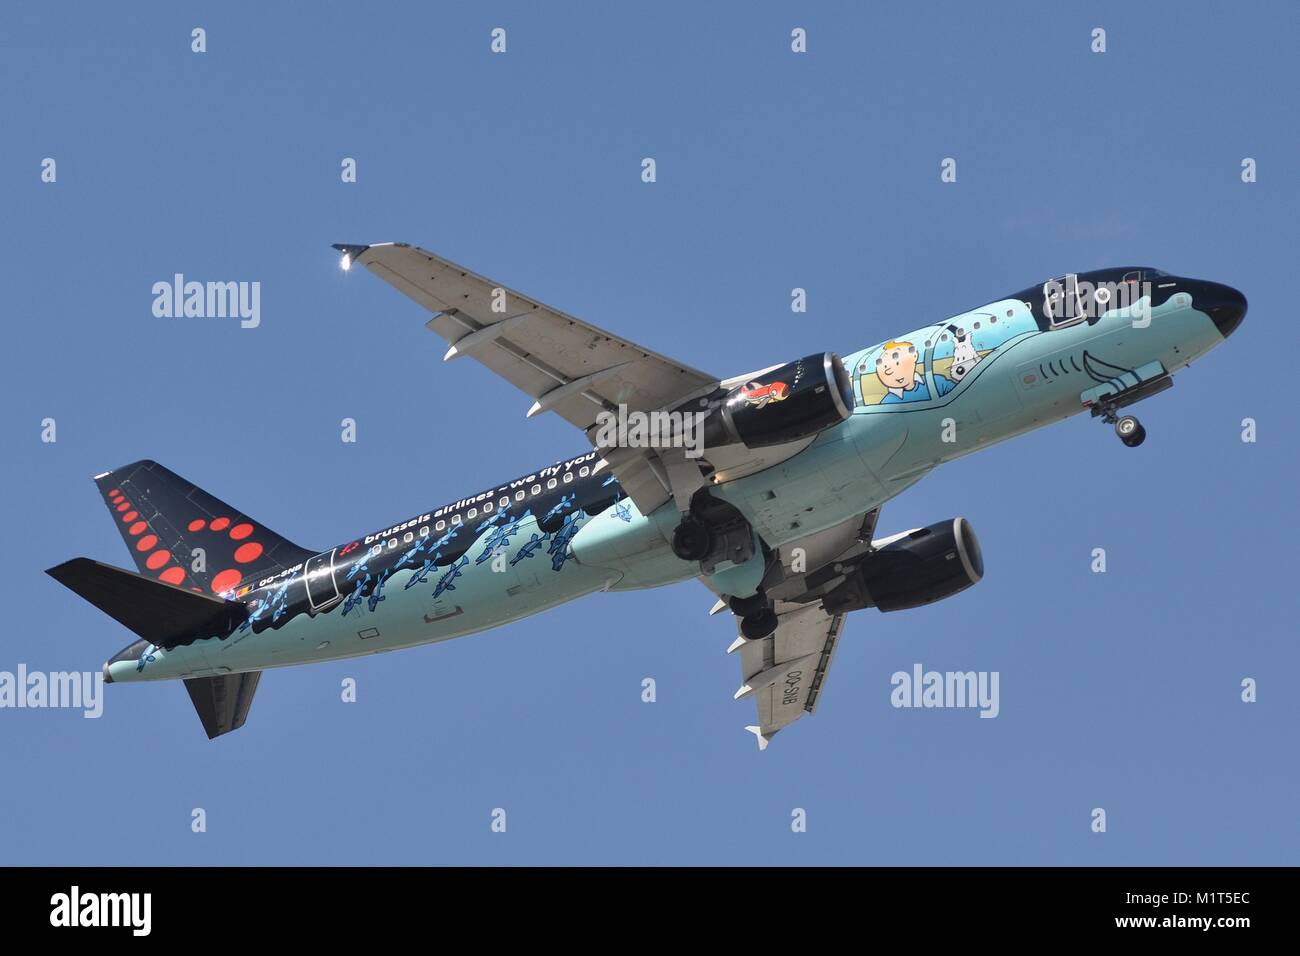 BRUSSELS AIRLINES AIRBUS A320-200 OO-BNS dans 'Tintin' LIVRÉE PUBLICITAIRE  Photo Stock - Alamy